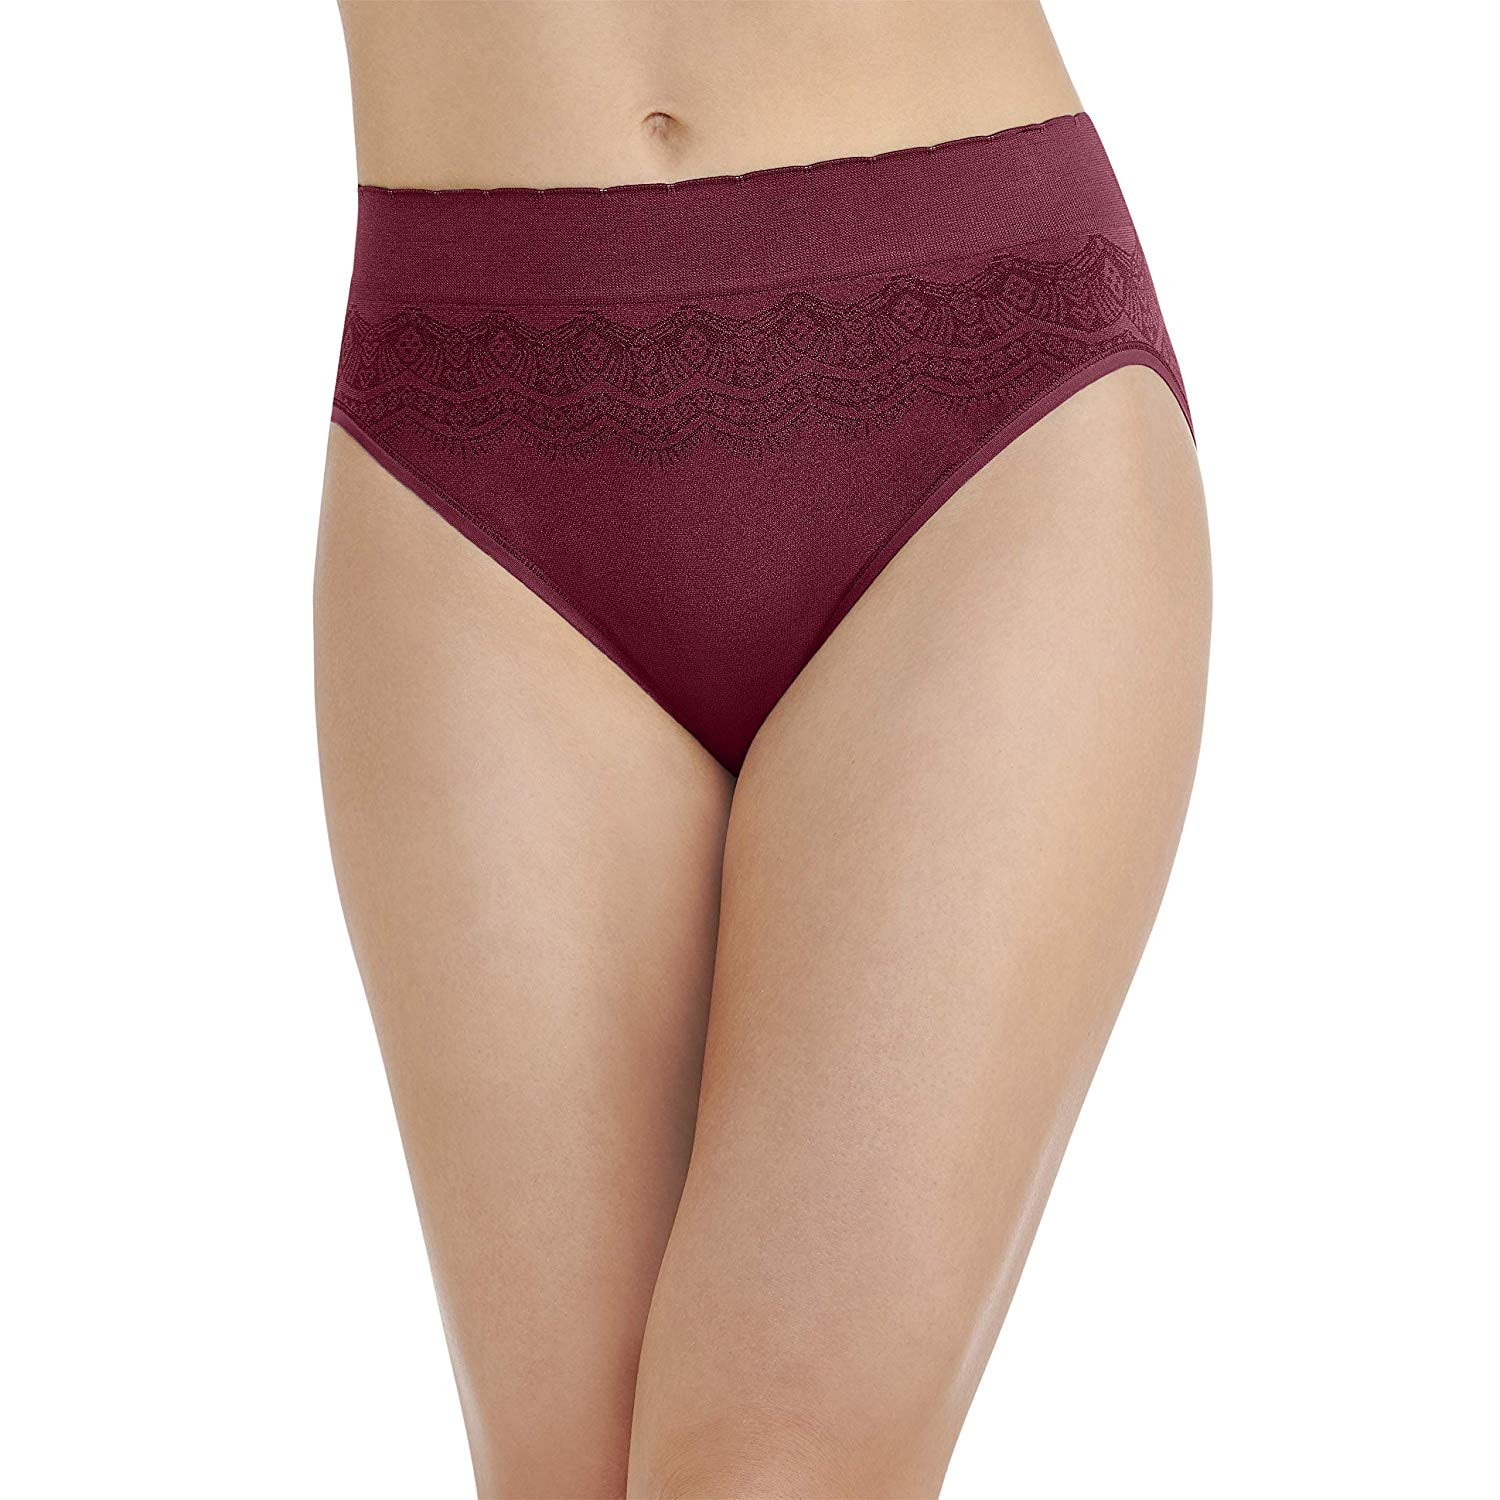 Details about   Hanes Ultimate Women's Smoothing Seamless Hi-Cut Brief 3-Pack